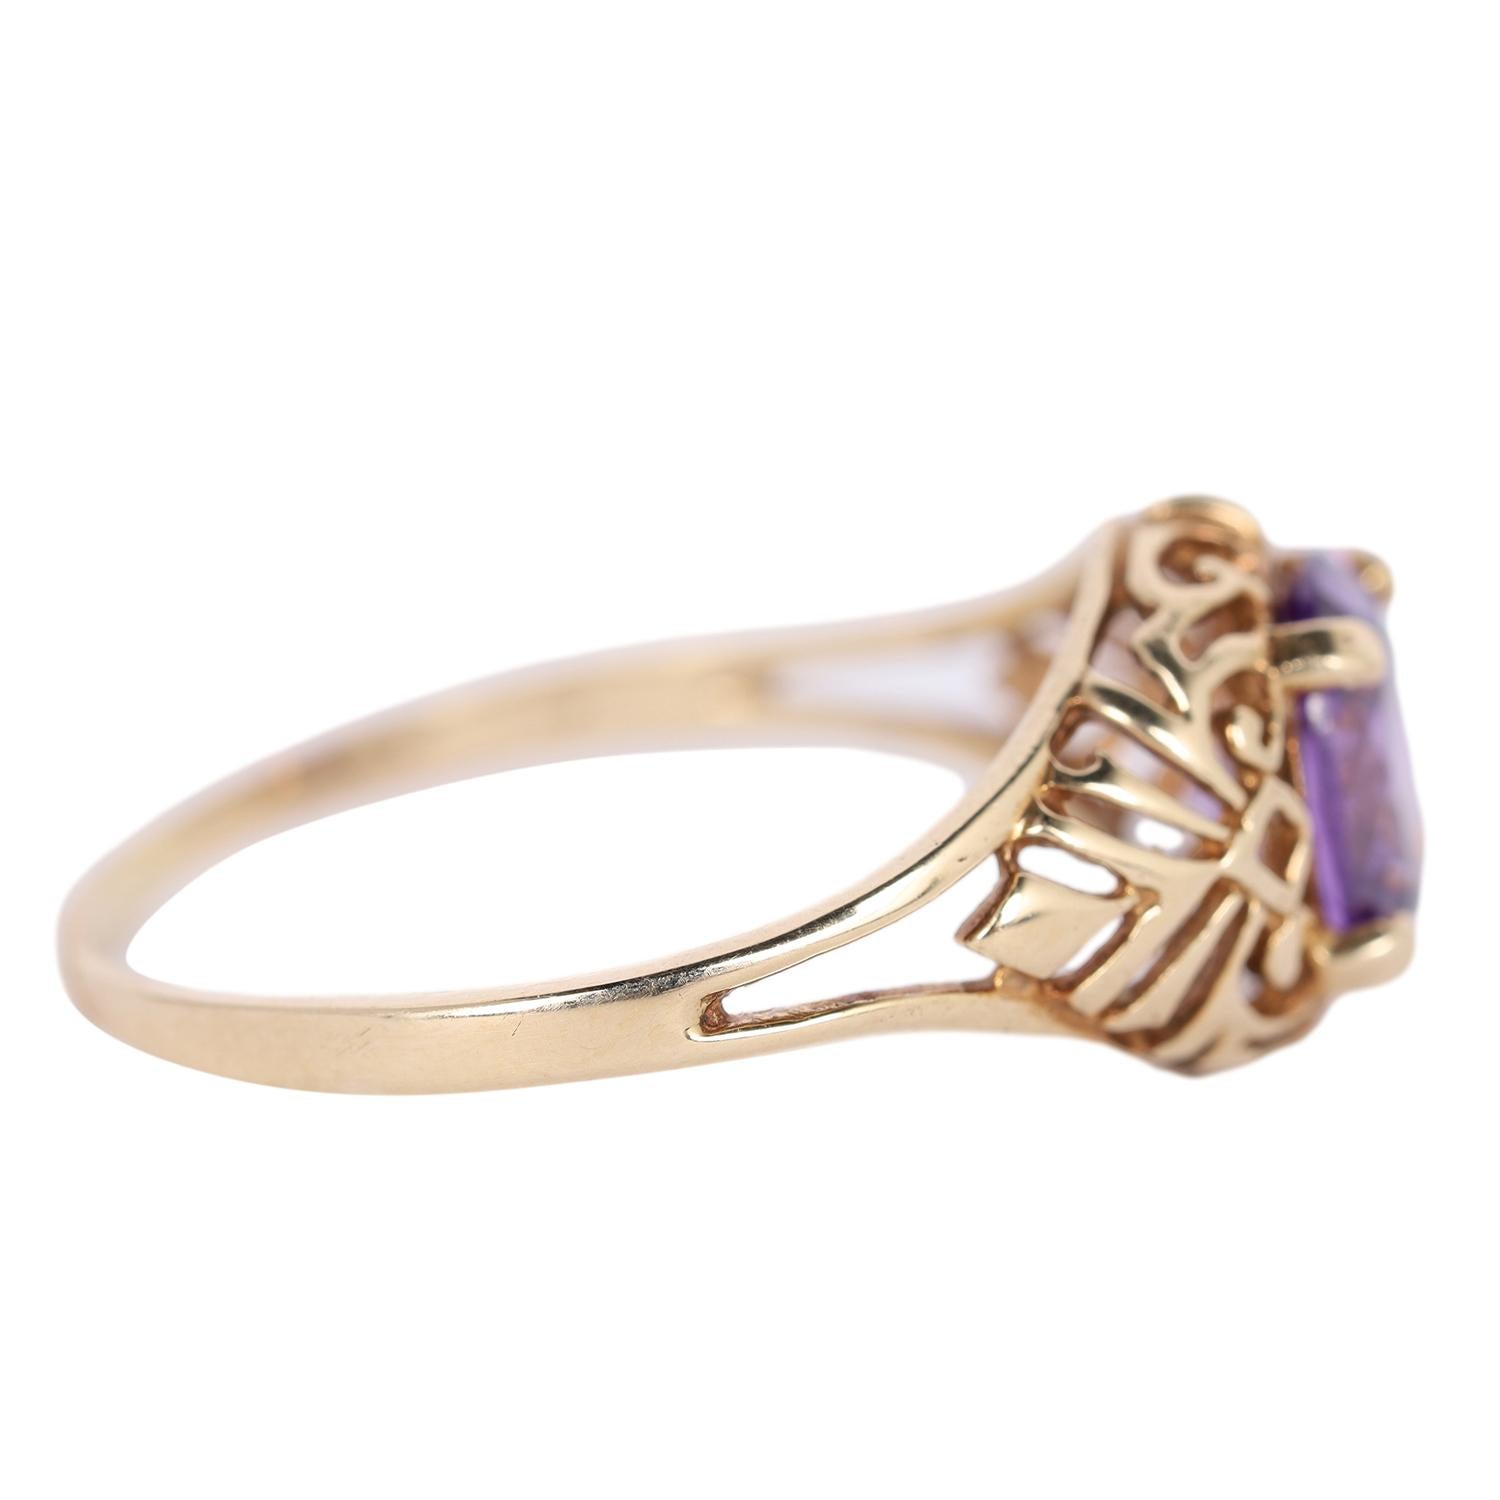 10Kt Yellow Gold Royal Purple Amethyst Solitaire Ring Filigree Size 8.5 For Sale 1